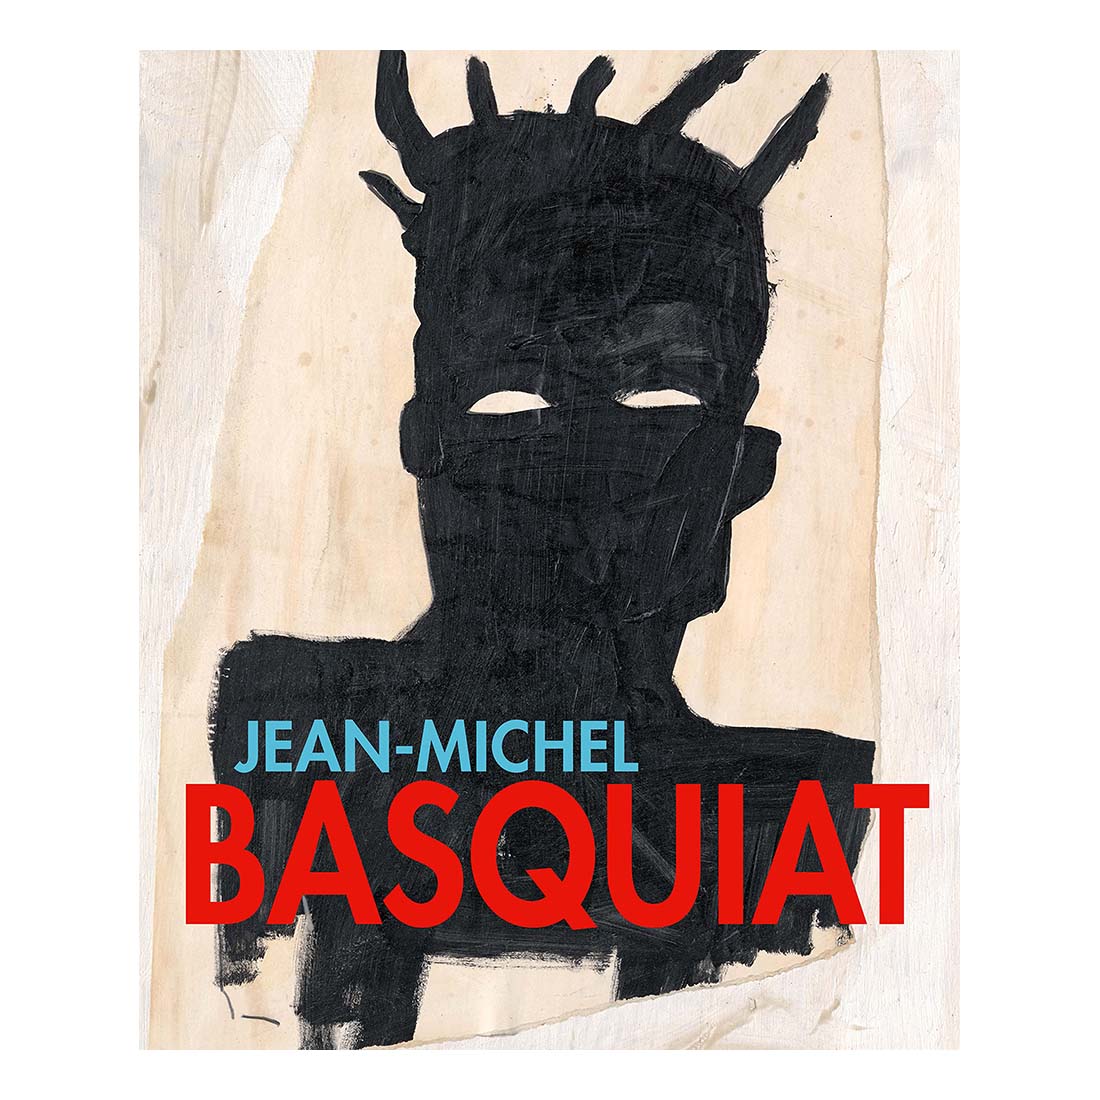 Jean-Michel Basquiat: Of Symbols and Signs